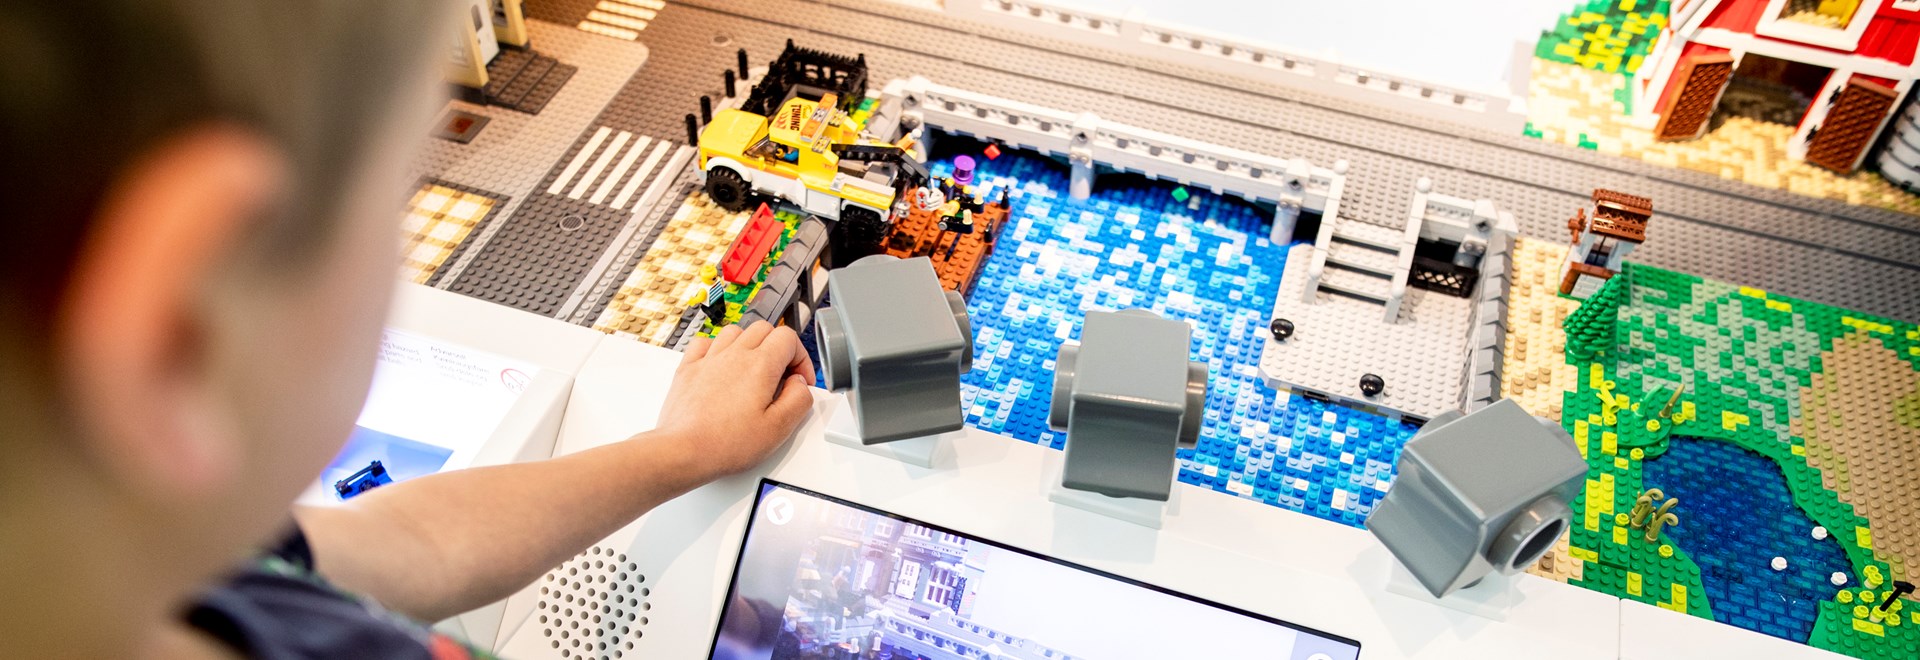 LEGO® House - Experiences in LEGO House